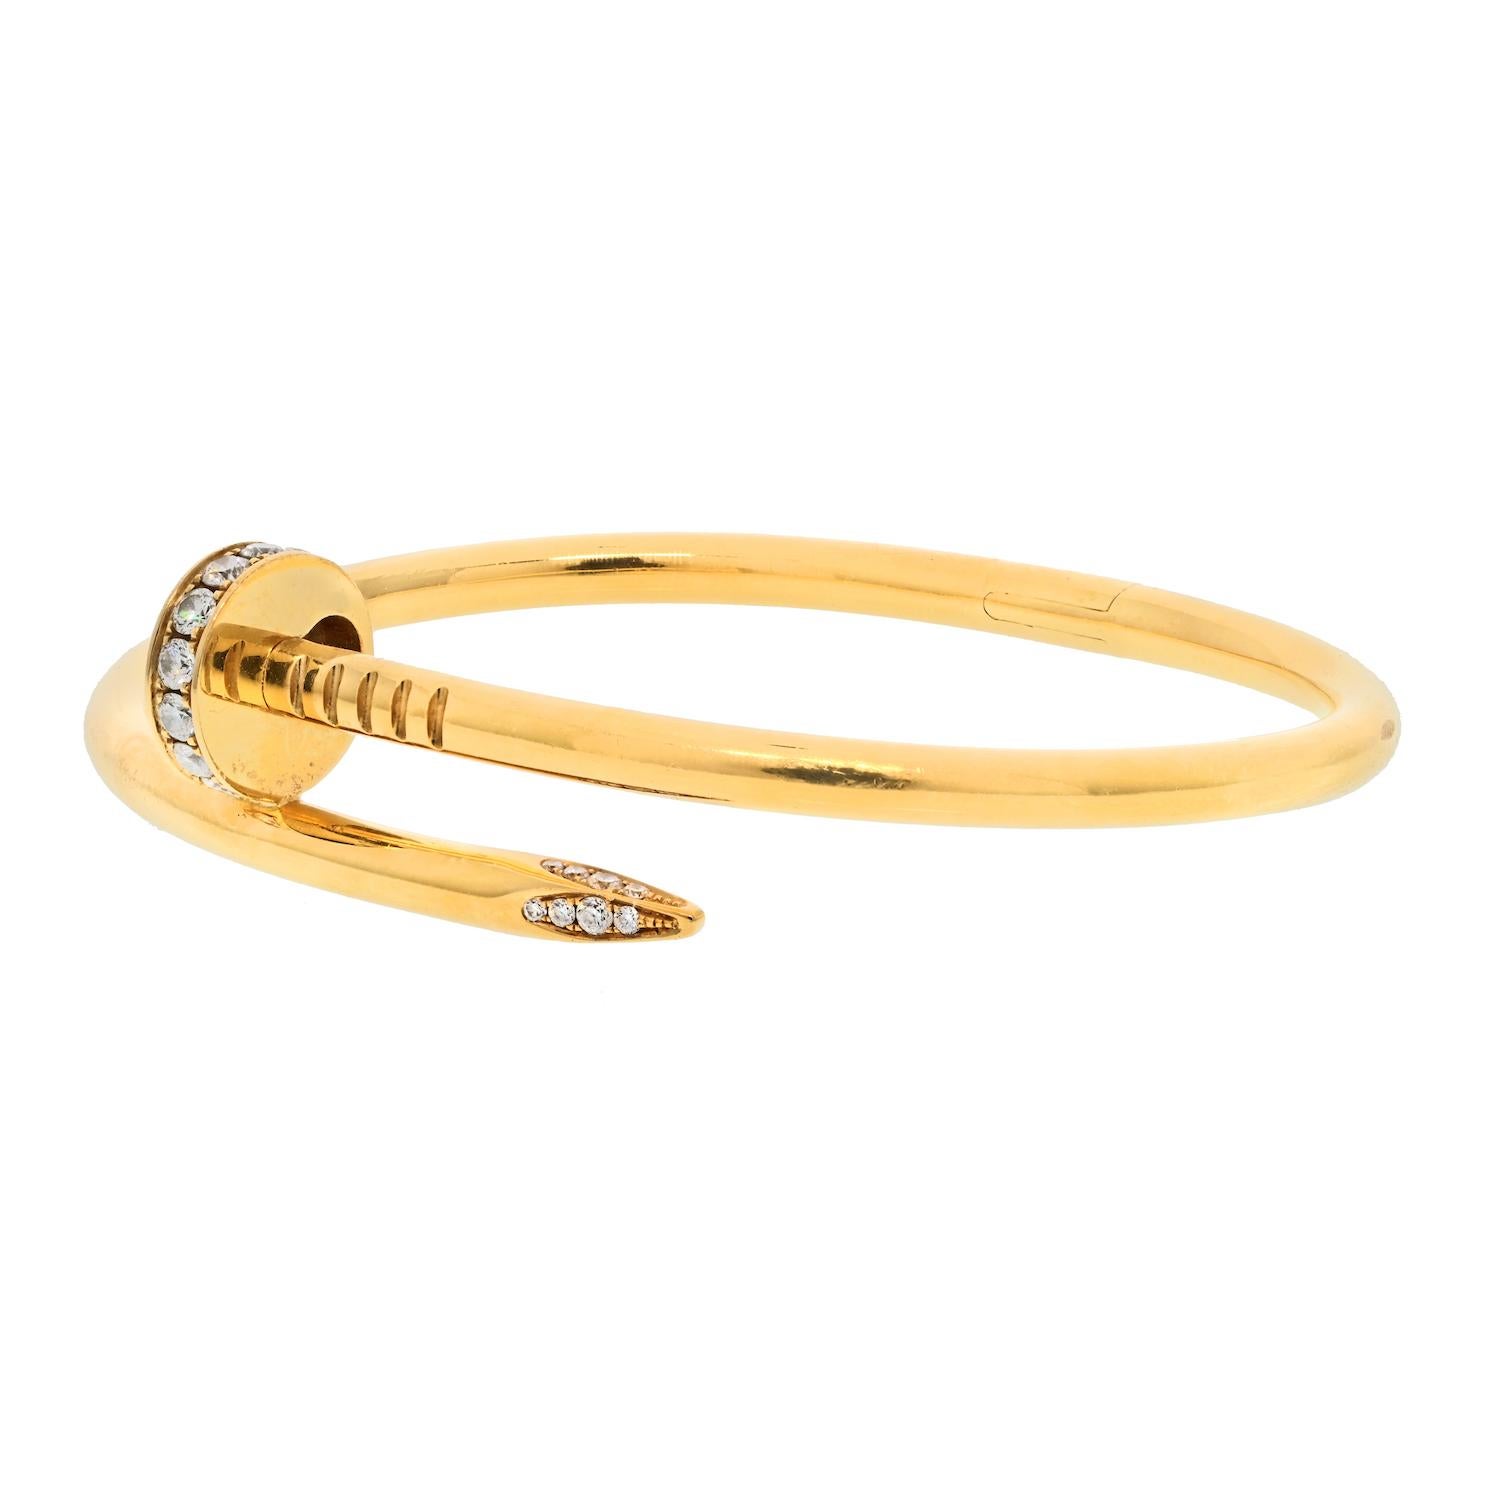 The pre-owned Juste Un Clou yellow gold diamond nail bracelet is a stunning piece of jewelry that is in excellent condition. This bracelet is crafted from high-quality yellow gold and features a unique nail design that is accented with diamonds. The